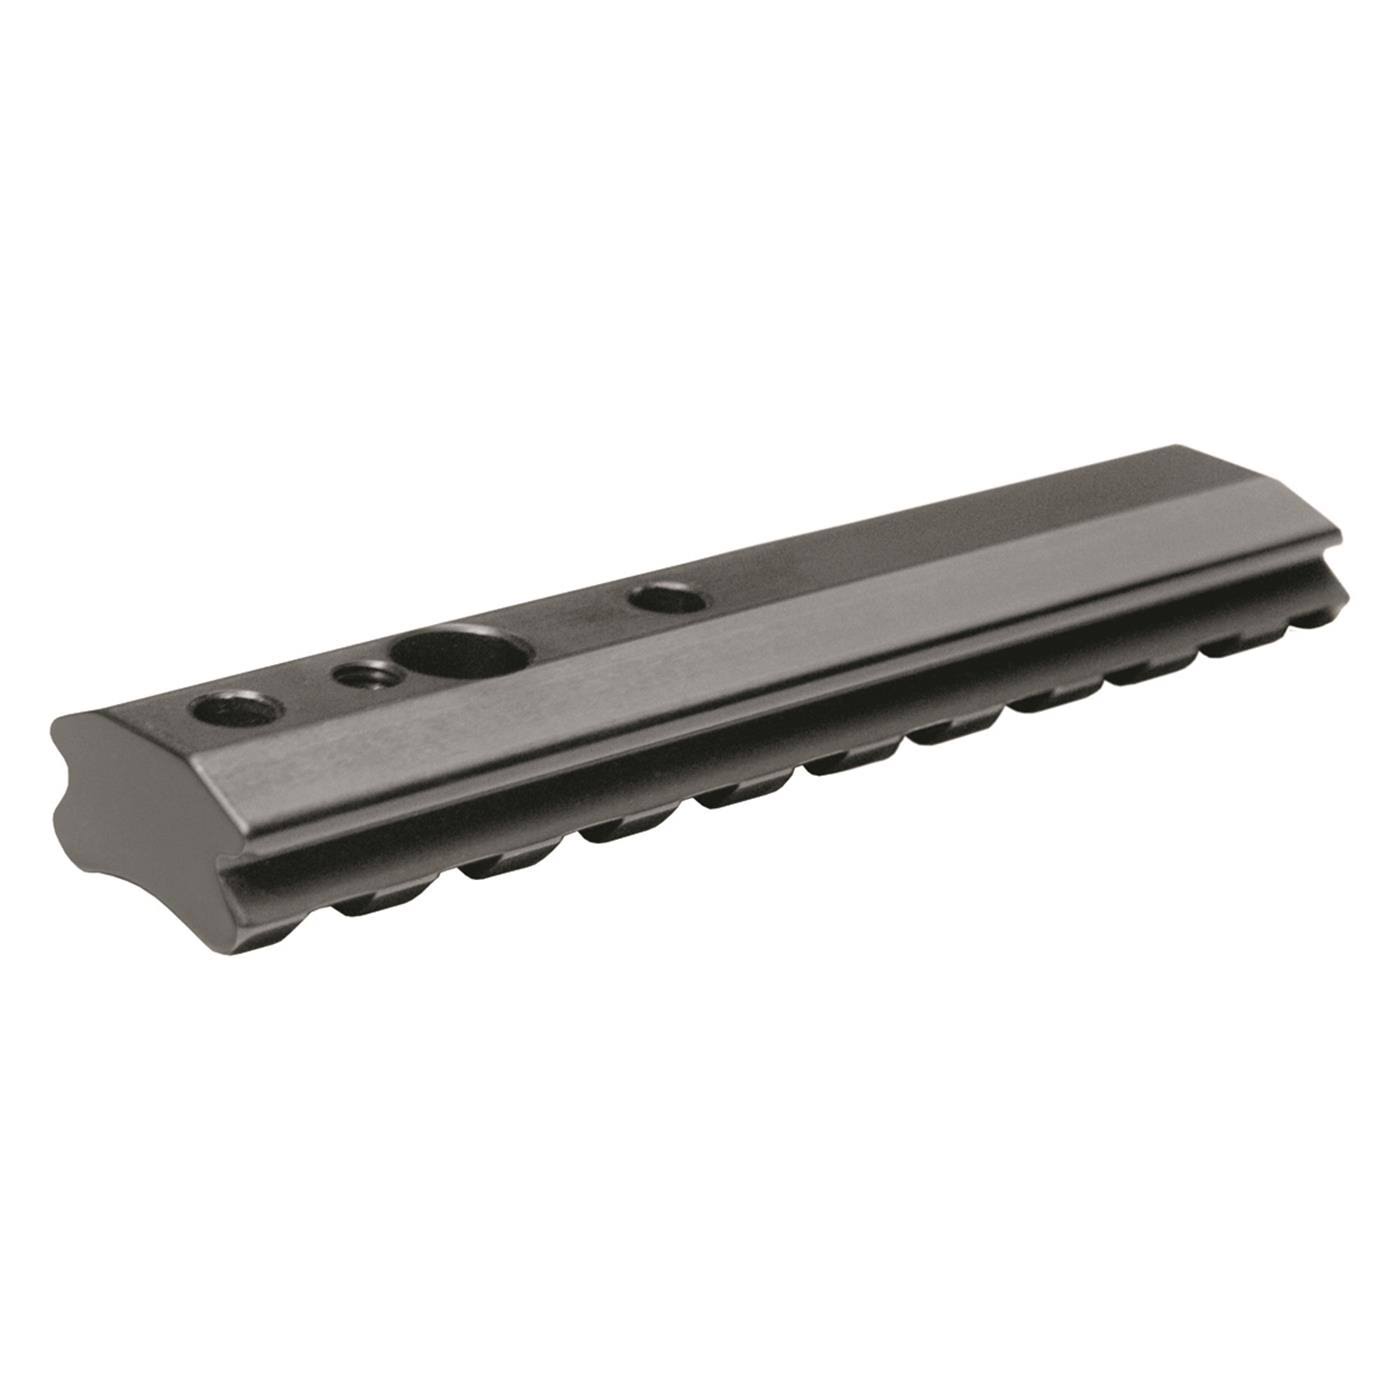 Mission Crossbow Picatinny Accessory Rail for Sub-1 Crossbows